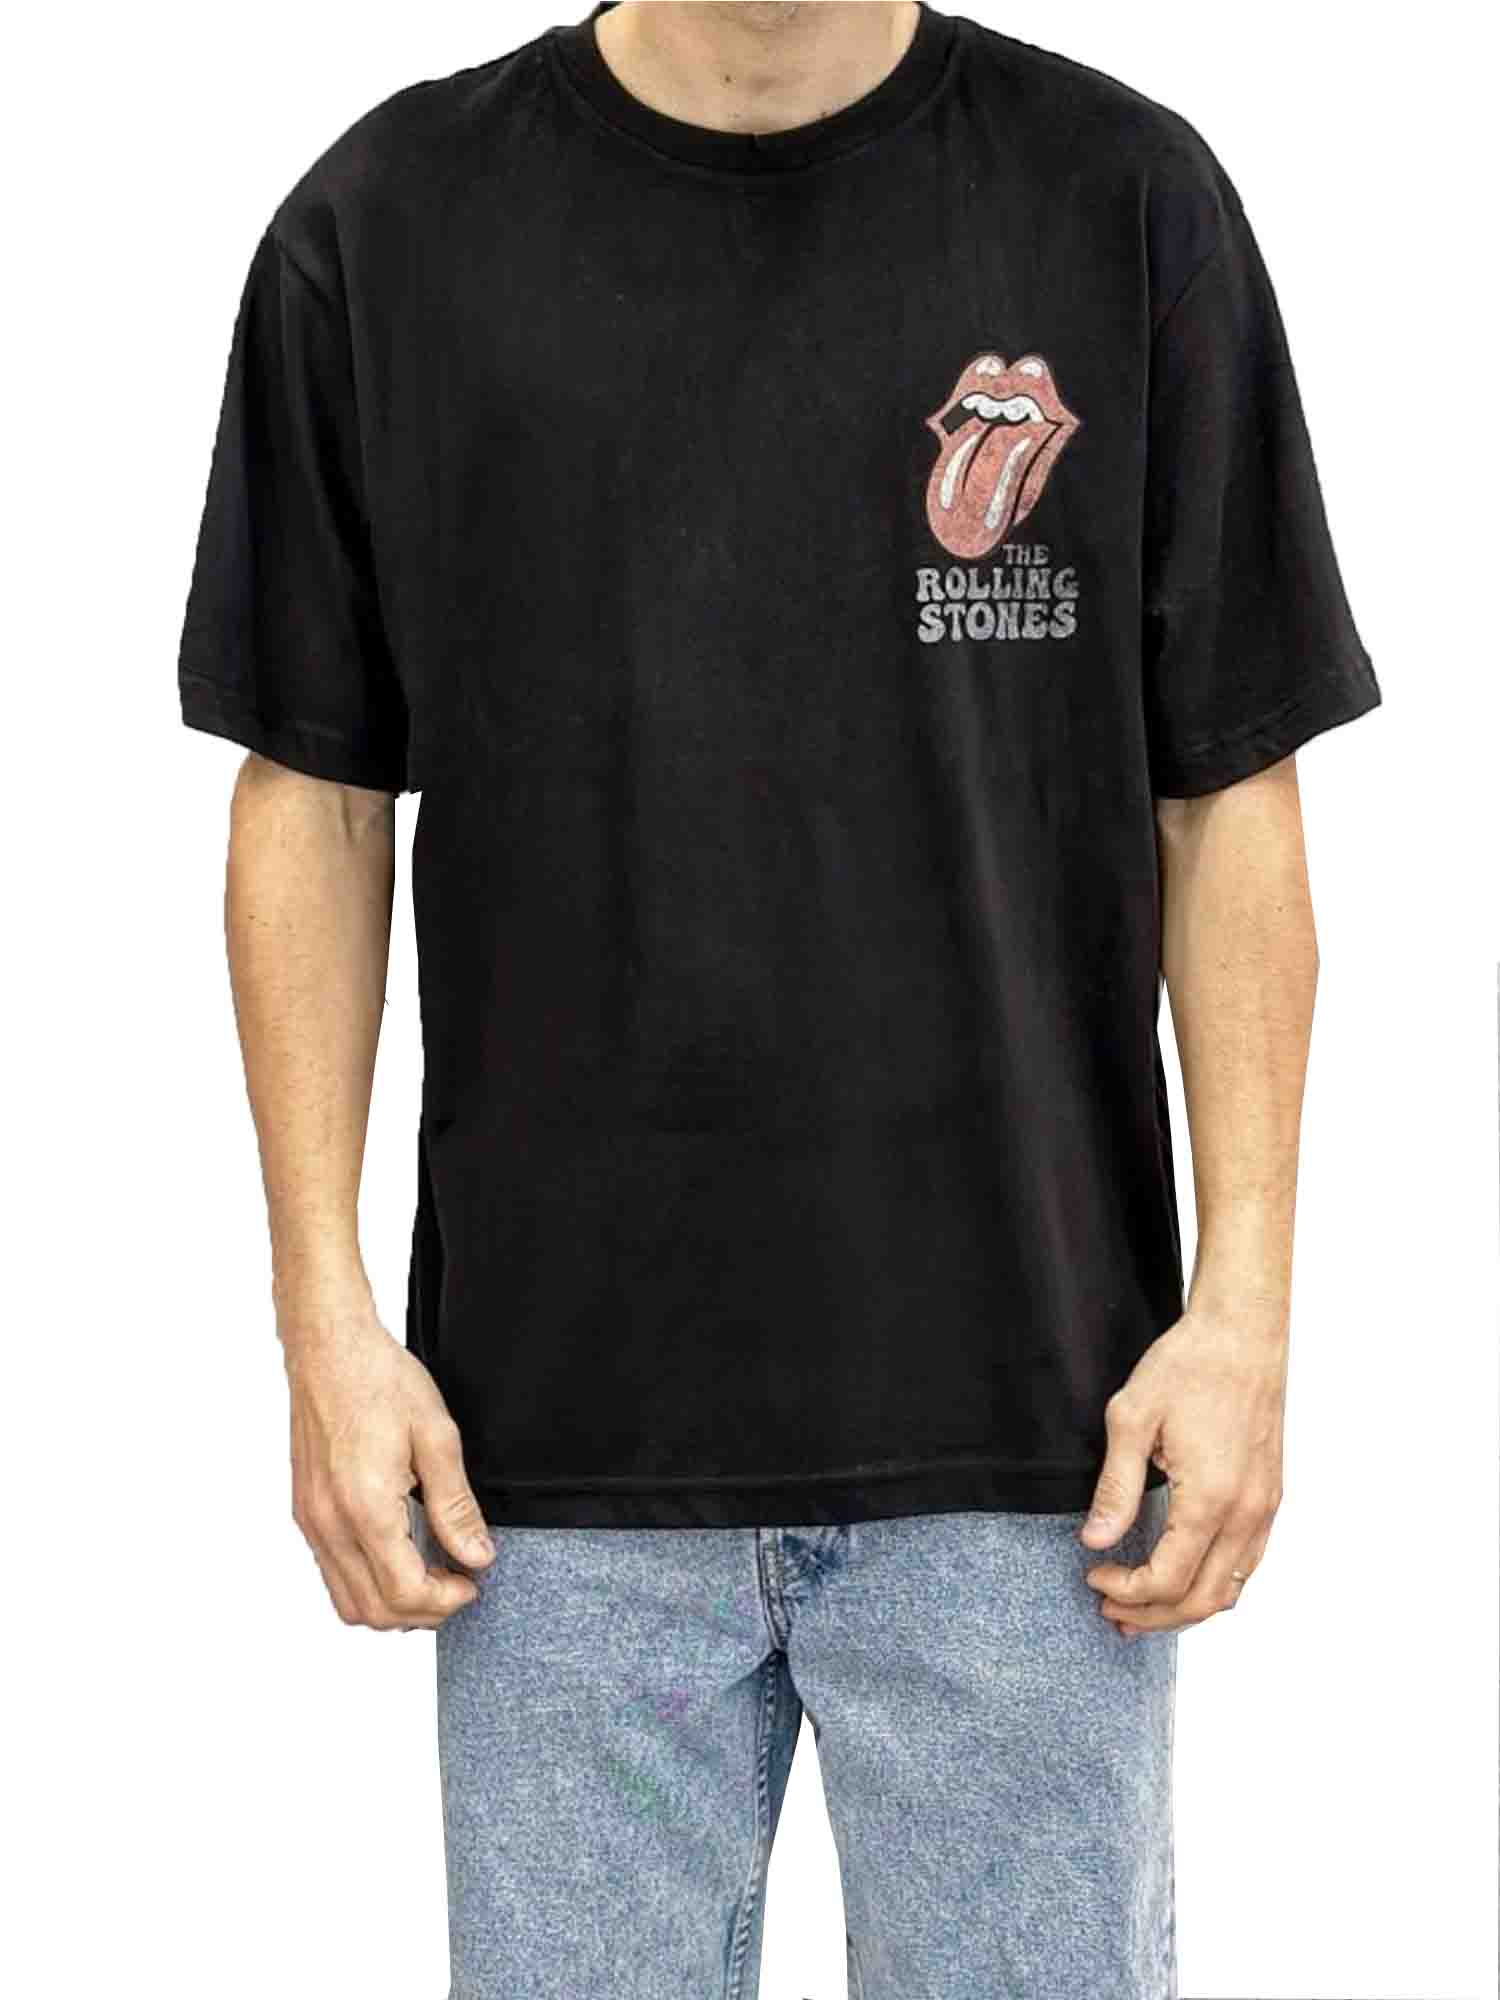 ONLY&SONS T-SHIRT THE ROLLING STONES NERO